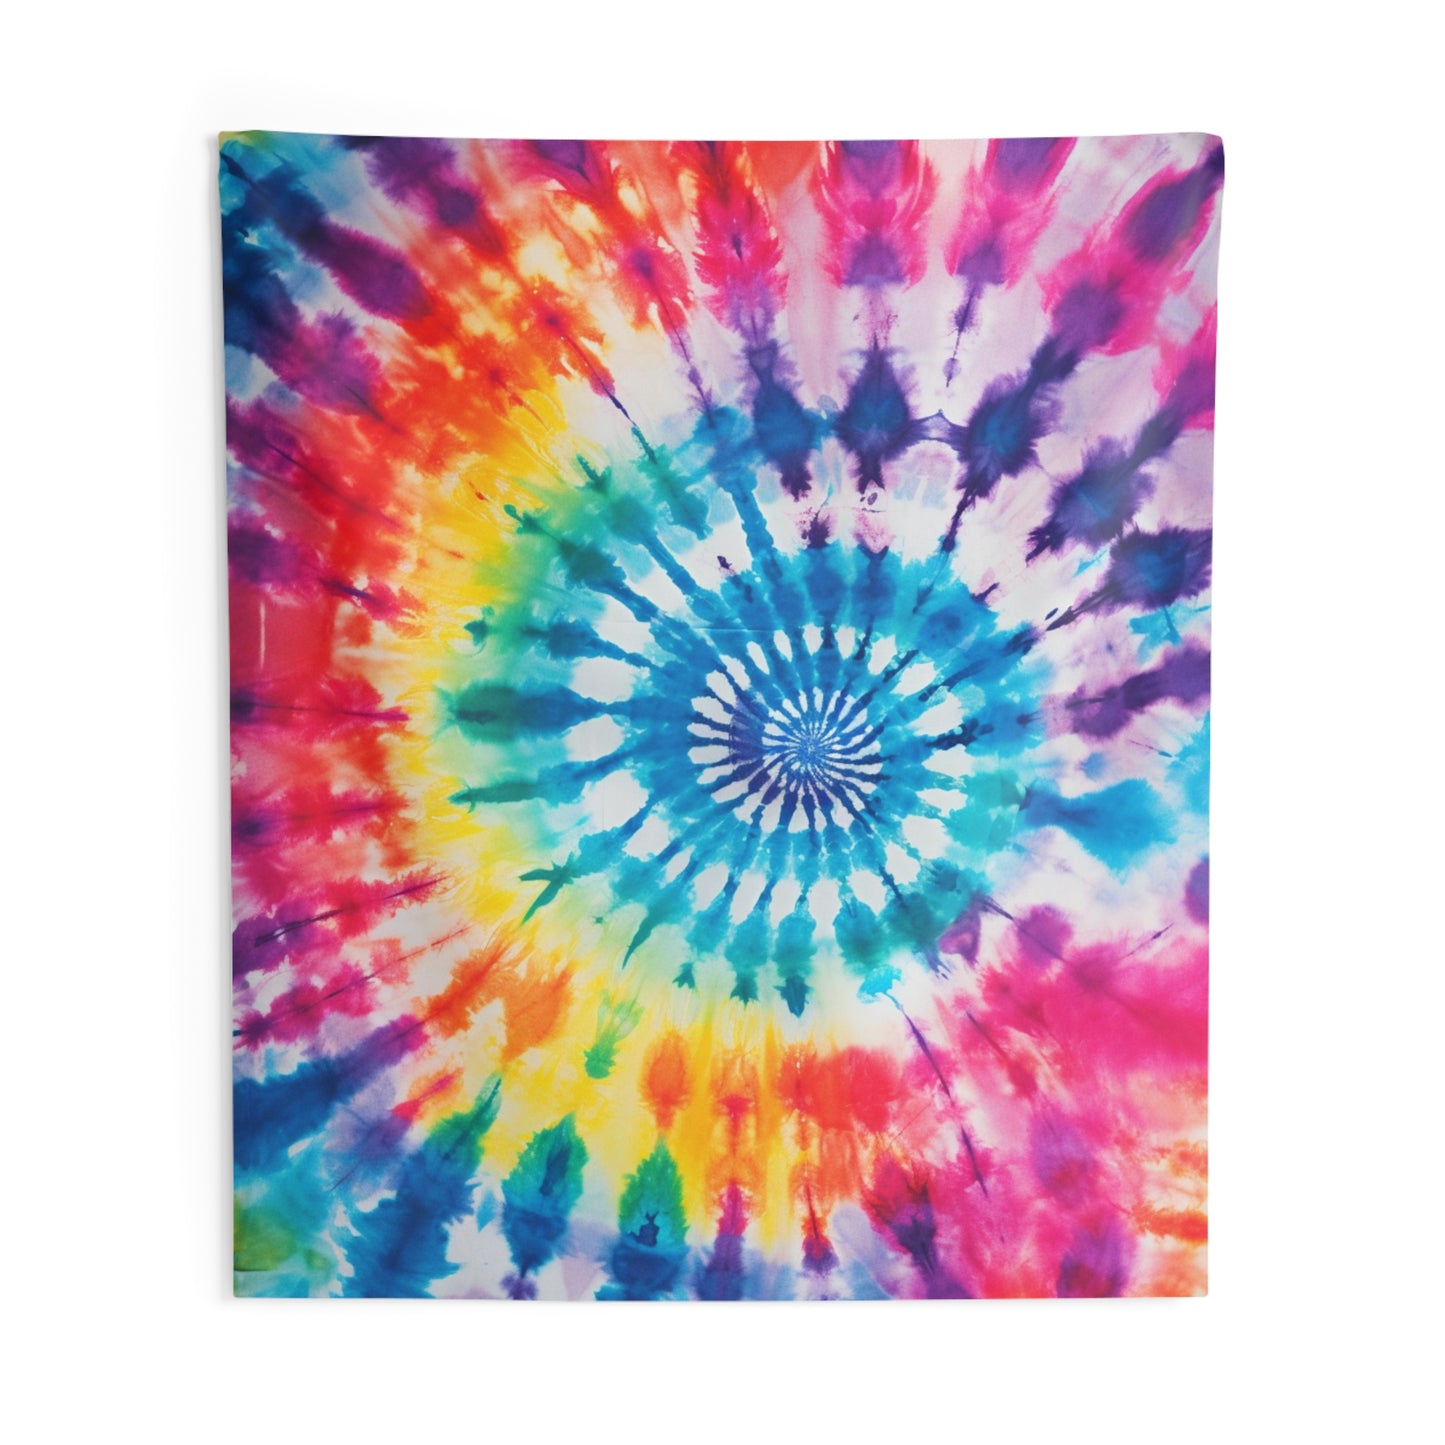 Hippie Tie Dye Tapestry, Wall Art Hanging Vertical Aesthetic Large Small Home Decor Bedroom College Dorm Room Starcove Fashion